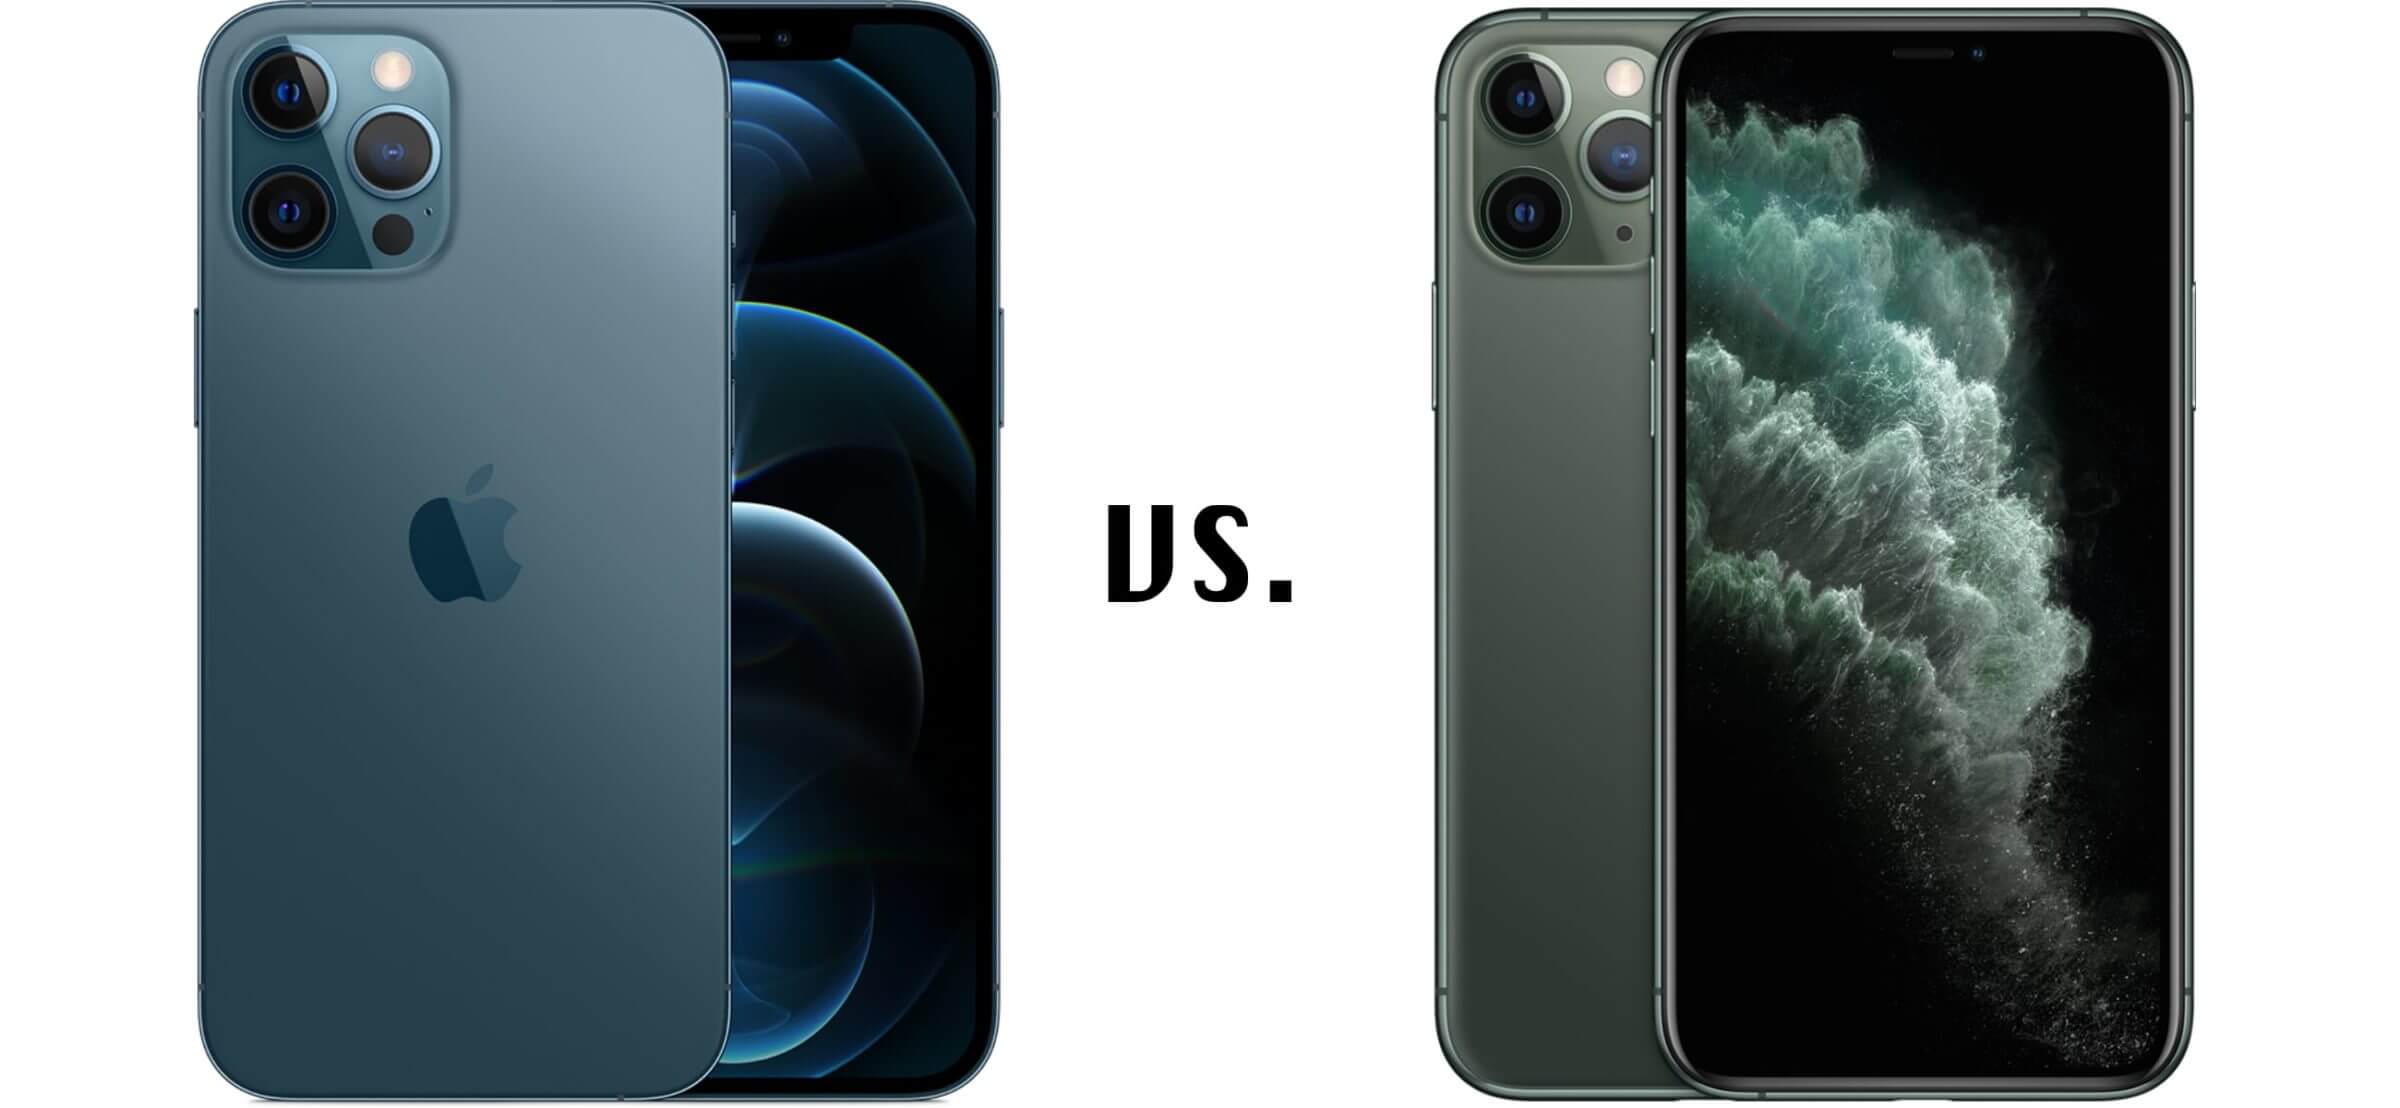 Iphone 12 Pro Max Vs Iphone 11 Pro Hands On Review And Comparison